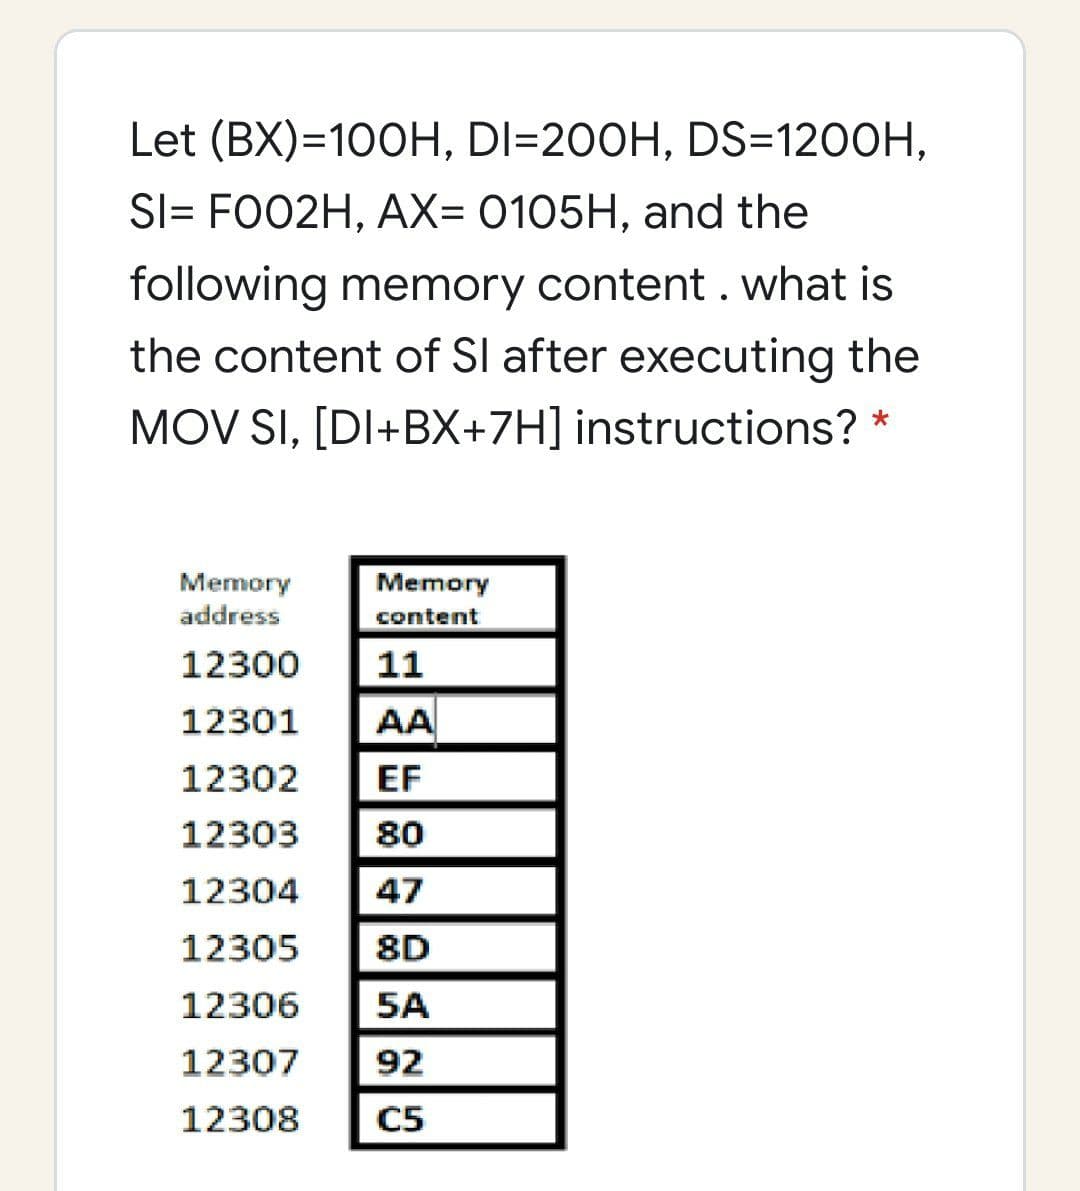 Let (BX)=100H, DI=200H, DS=1200H,
SI= FO02H, AX= 0105H, and the
following memory content .what is
the content of Sl after executing the
MOV SI, [DI+BX+7H] instructions? *
Memory
address
Memory
content
12300
11
12301
AA
12302
EF
12303
80
12304
47
12305
8D
12306
5A
12307
92
12308
C5
